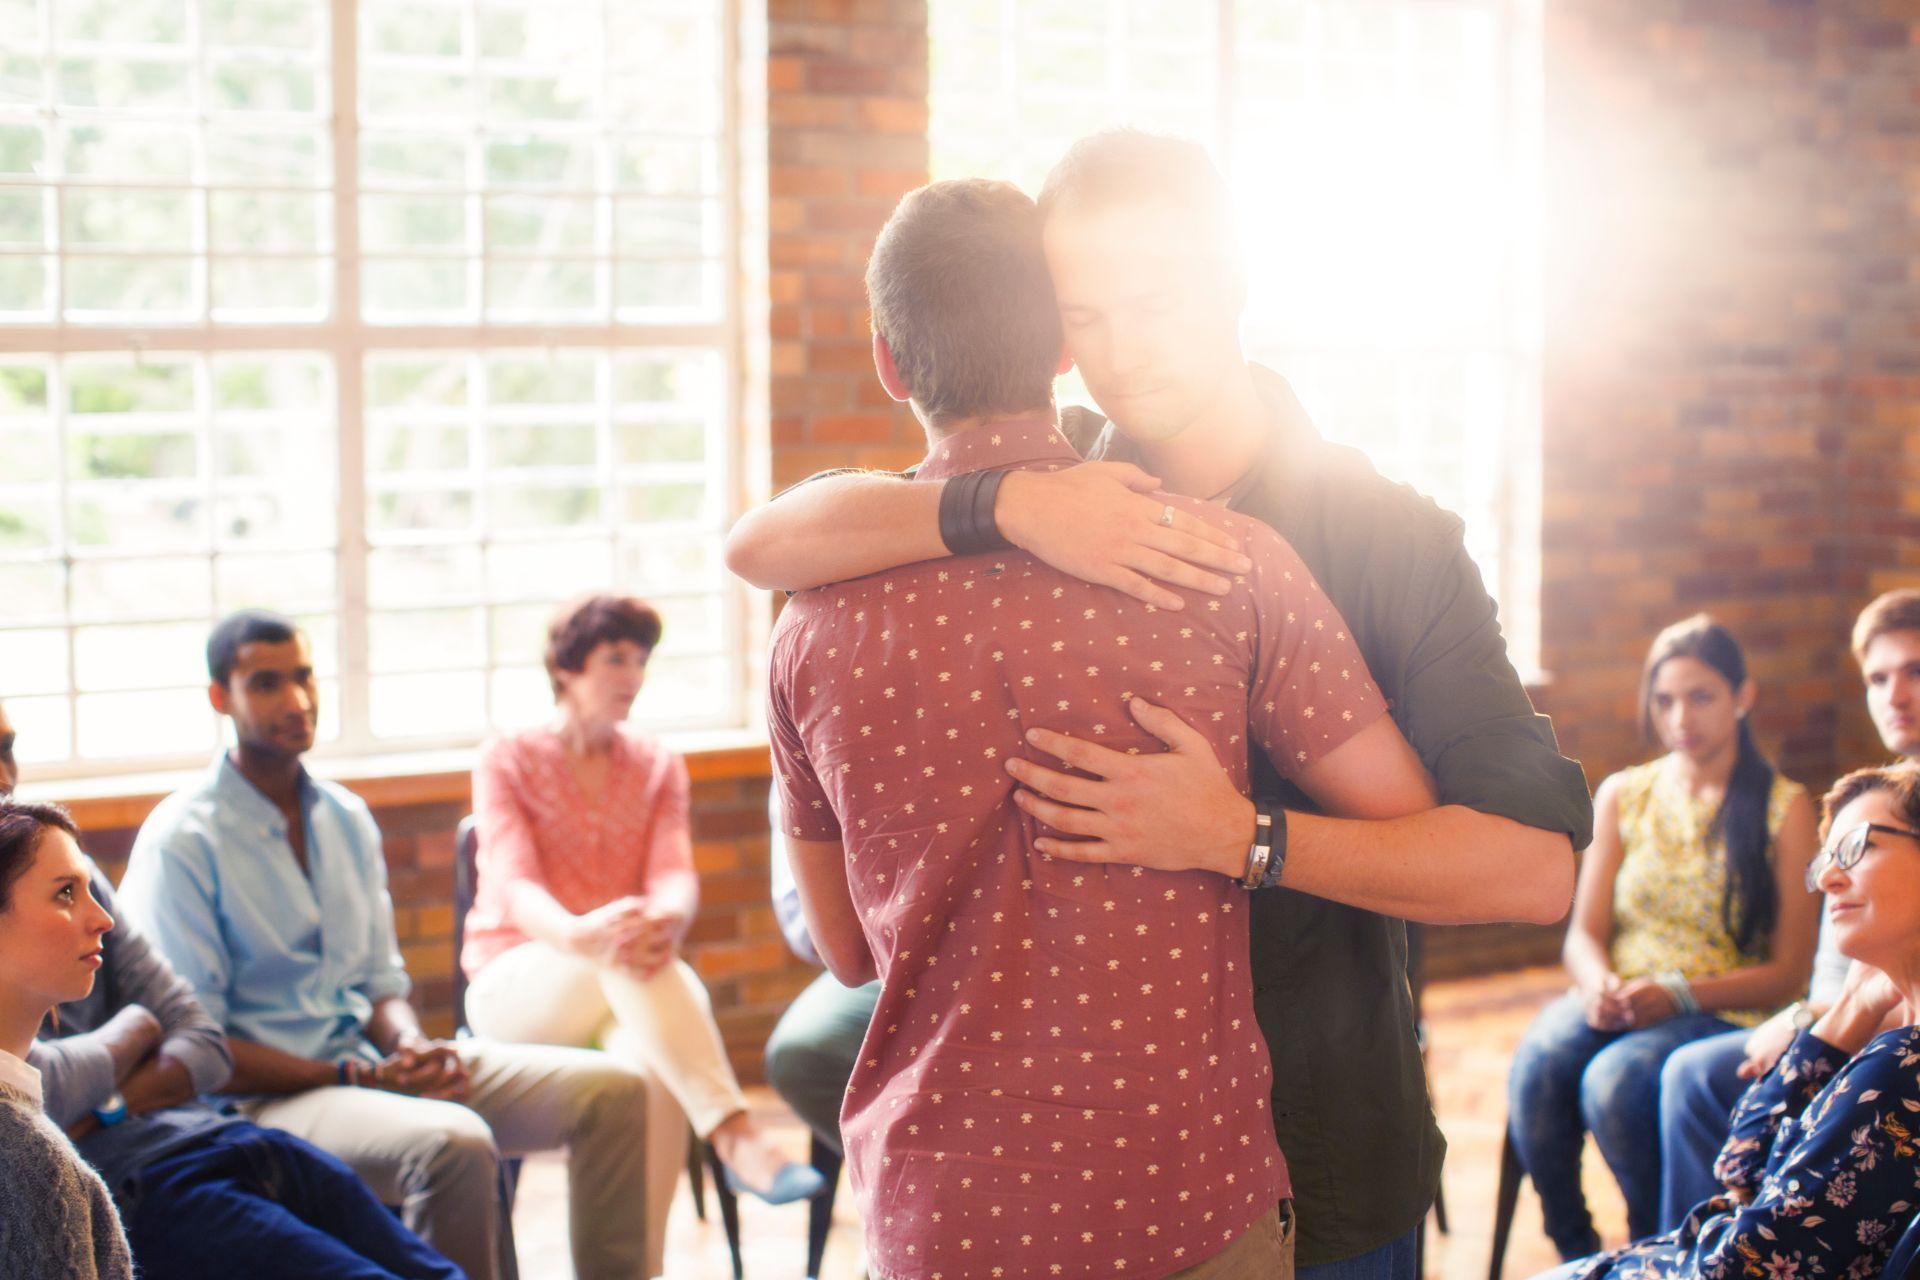 Men hugging at group therapy session